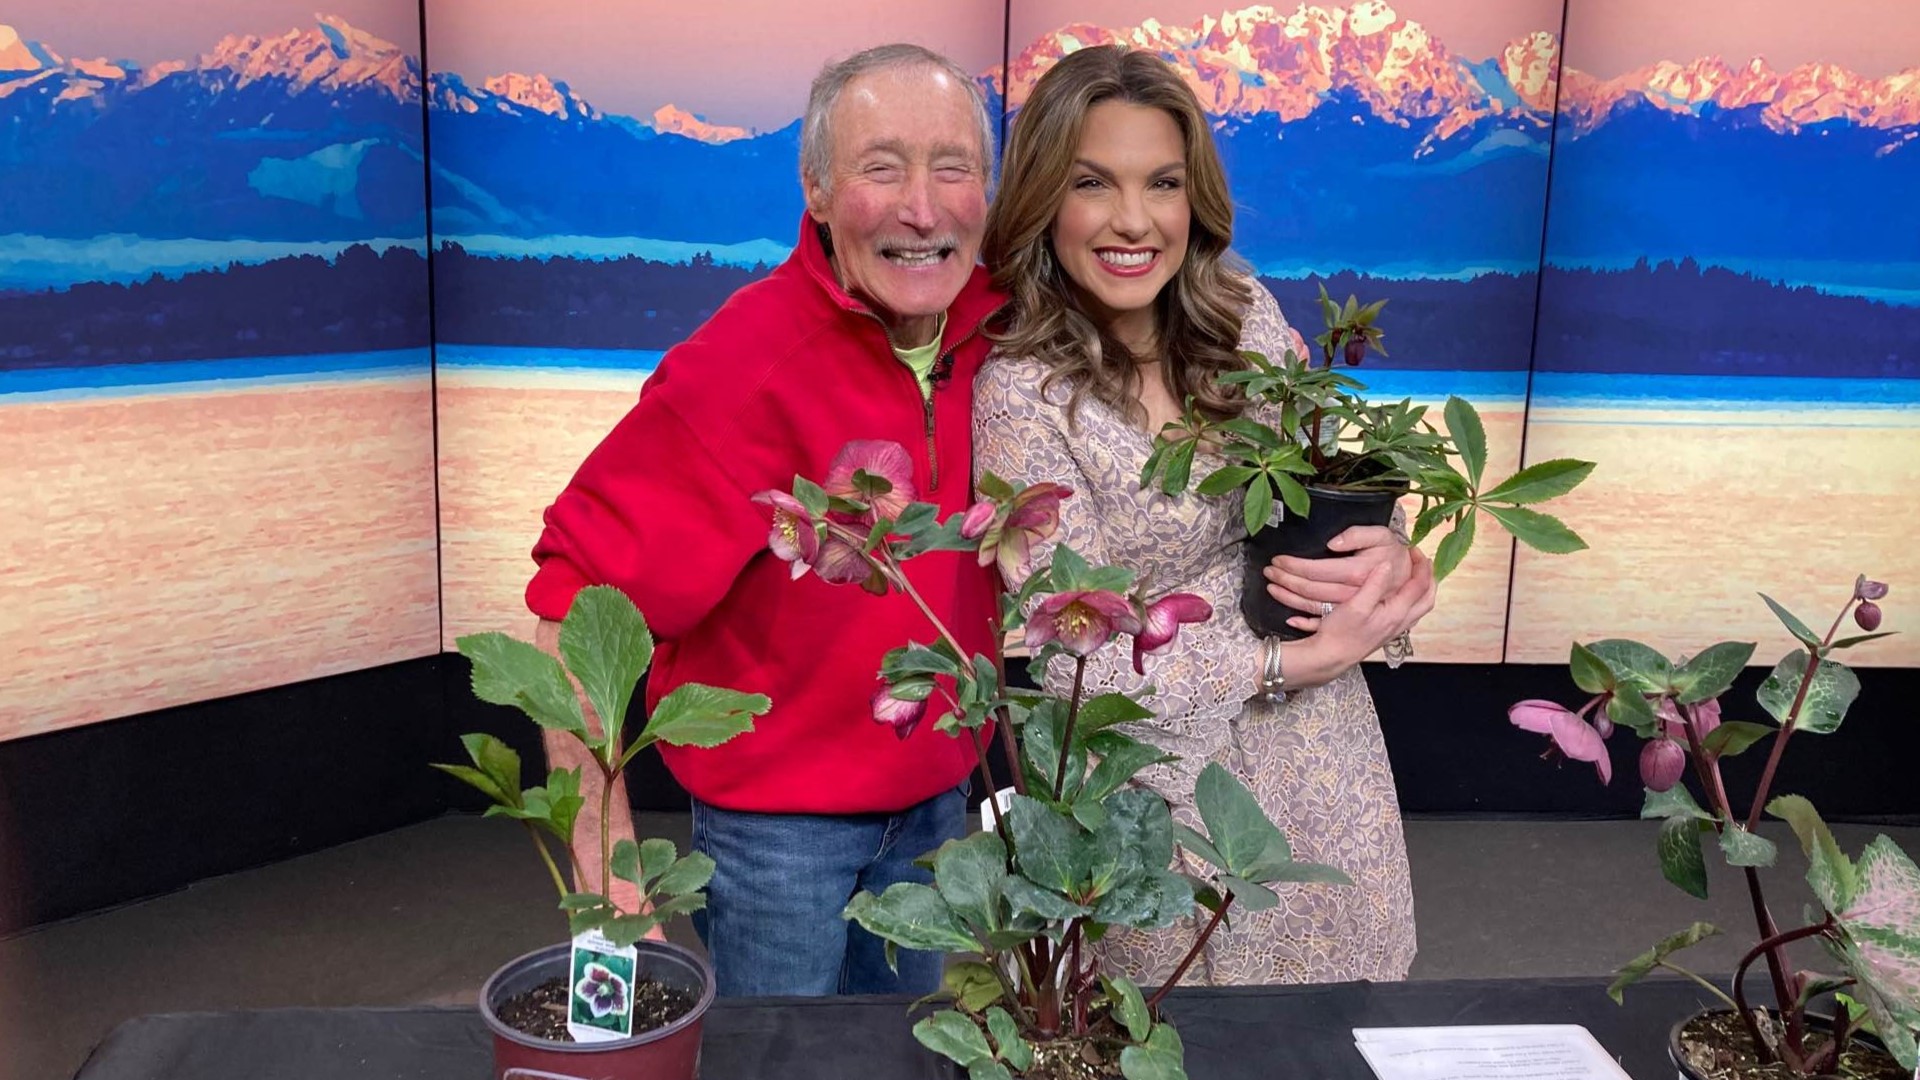 Master gardener Ciscoe Morris says hellebores are drought tolerant and pest free — even the deer snub them. #newdaynw